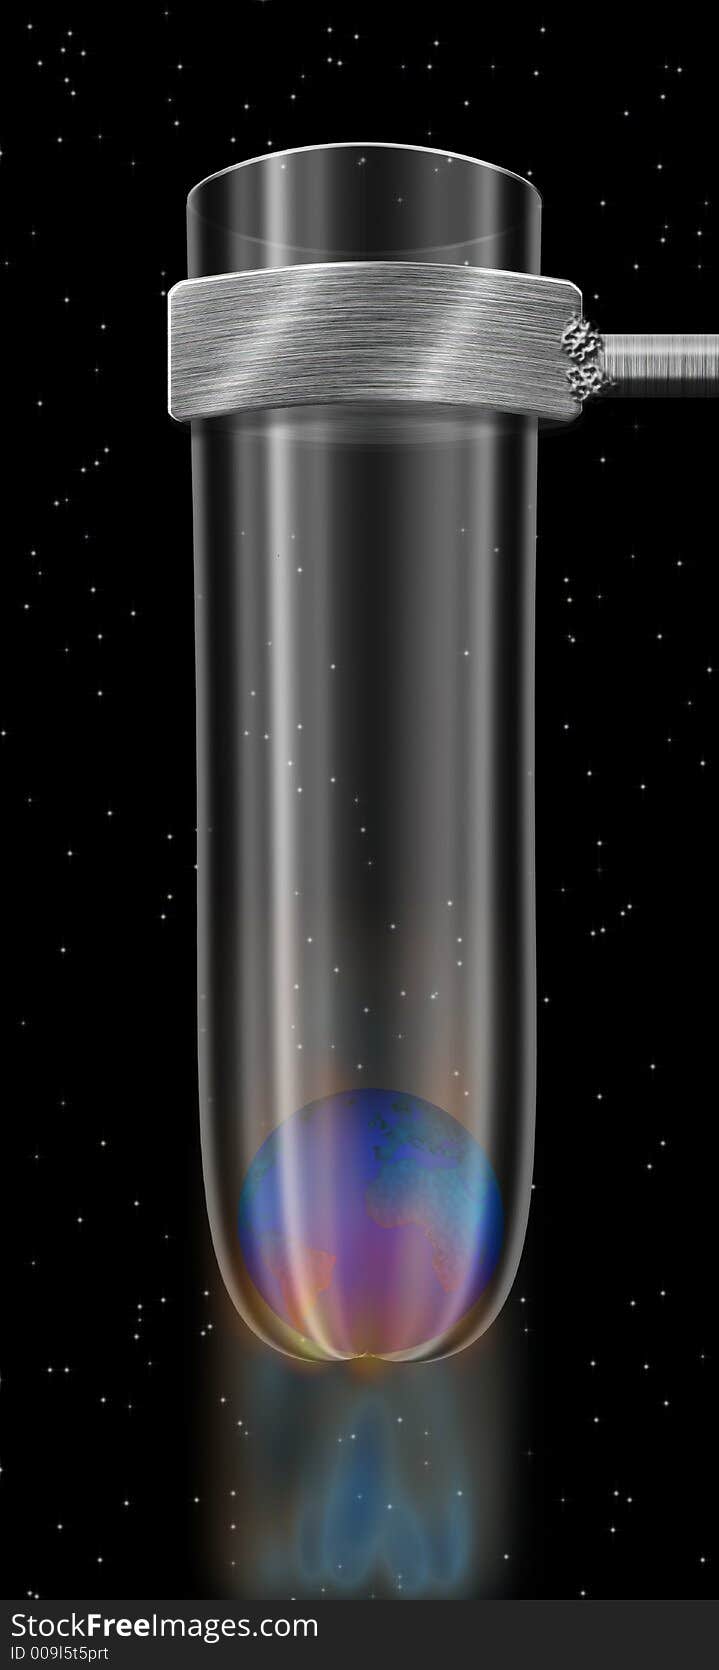 The earth inside a warming test tube. The earth inside a warming test tube